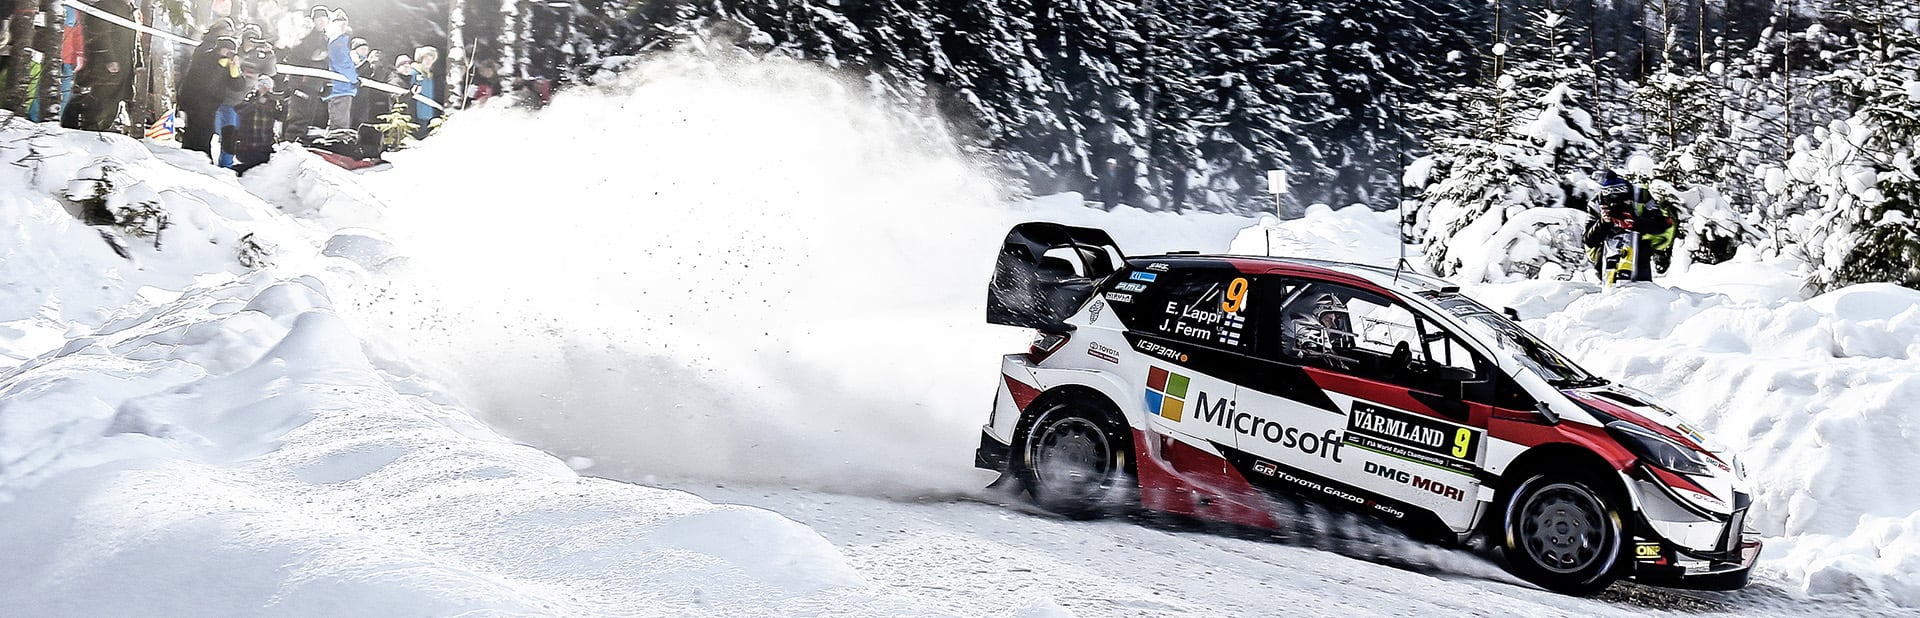 The Yaris WRC finishes with a flourish in Sweden